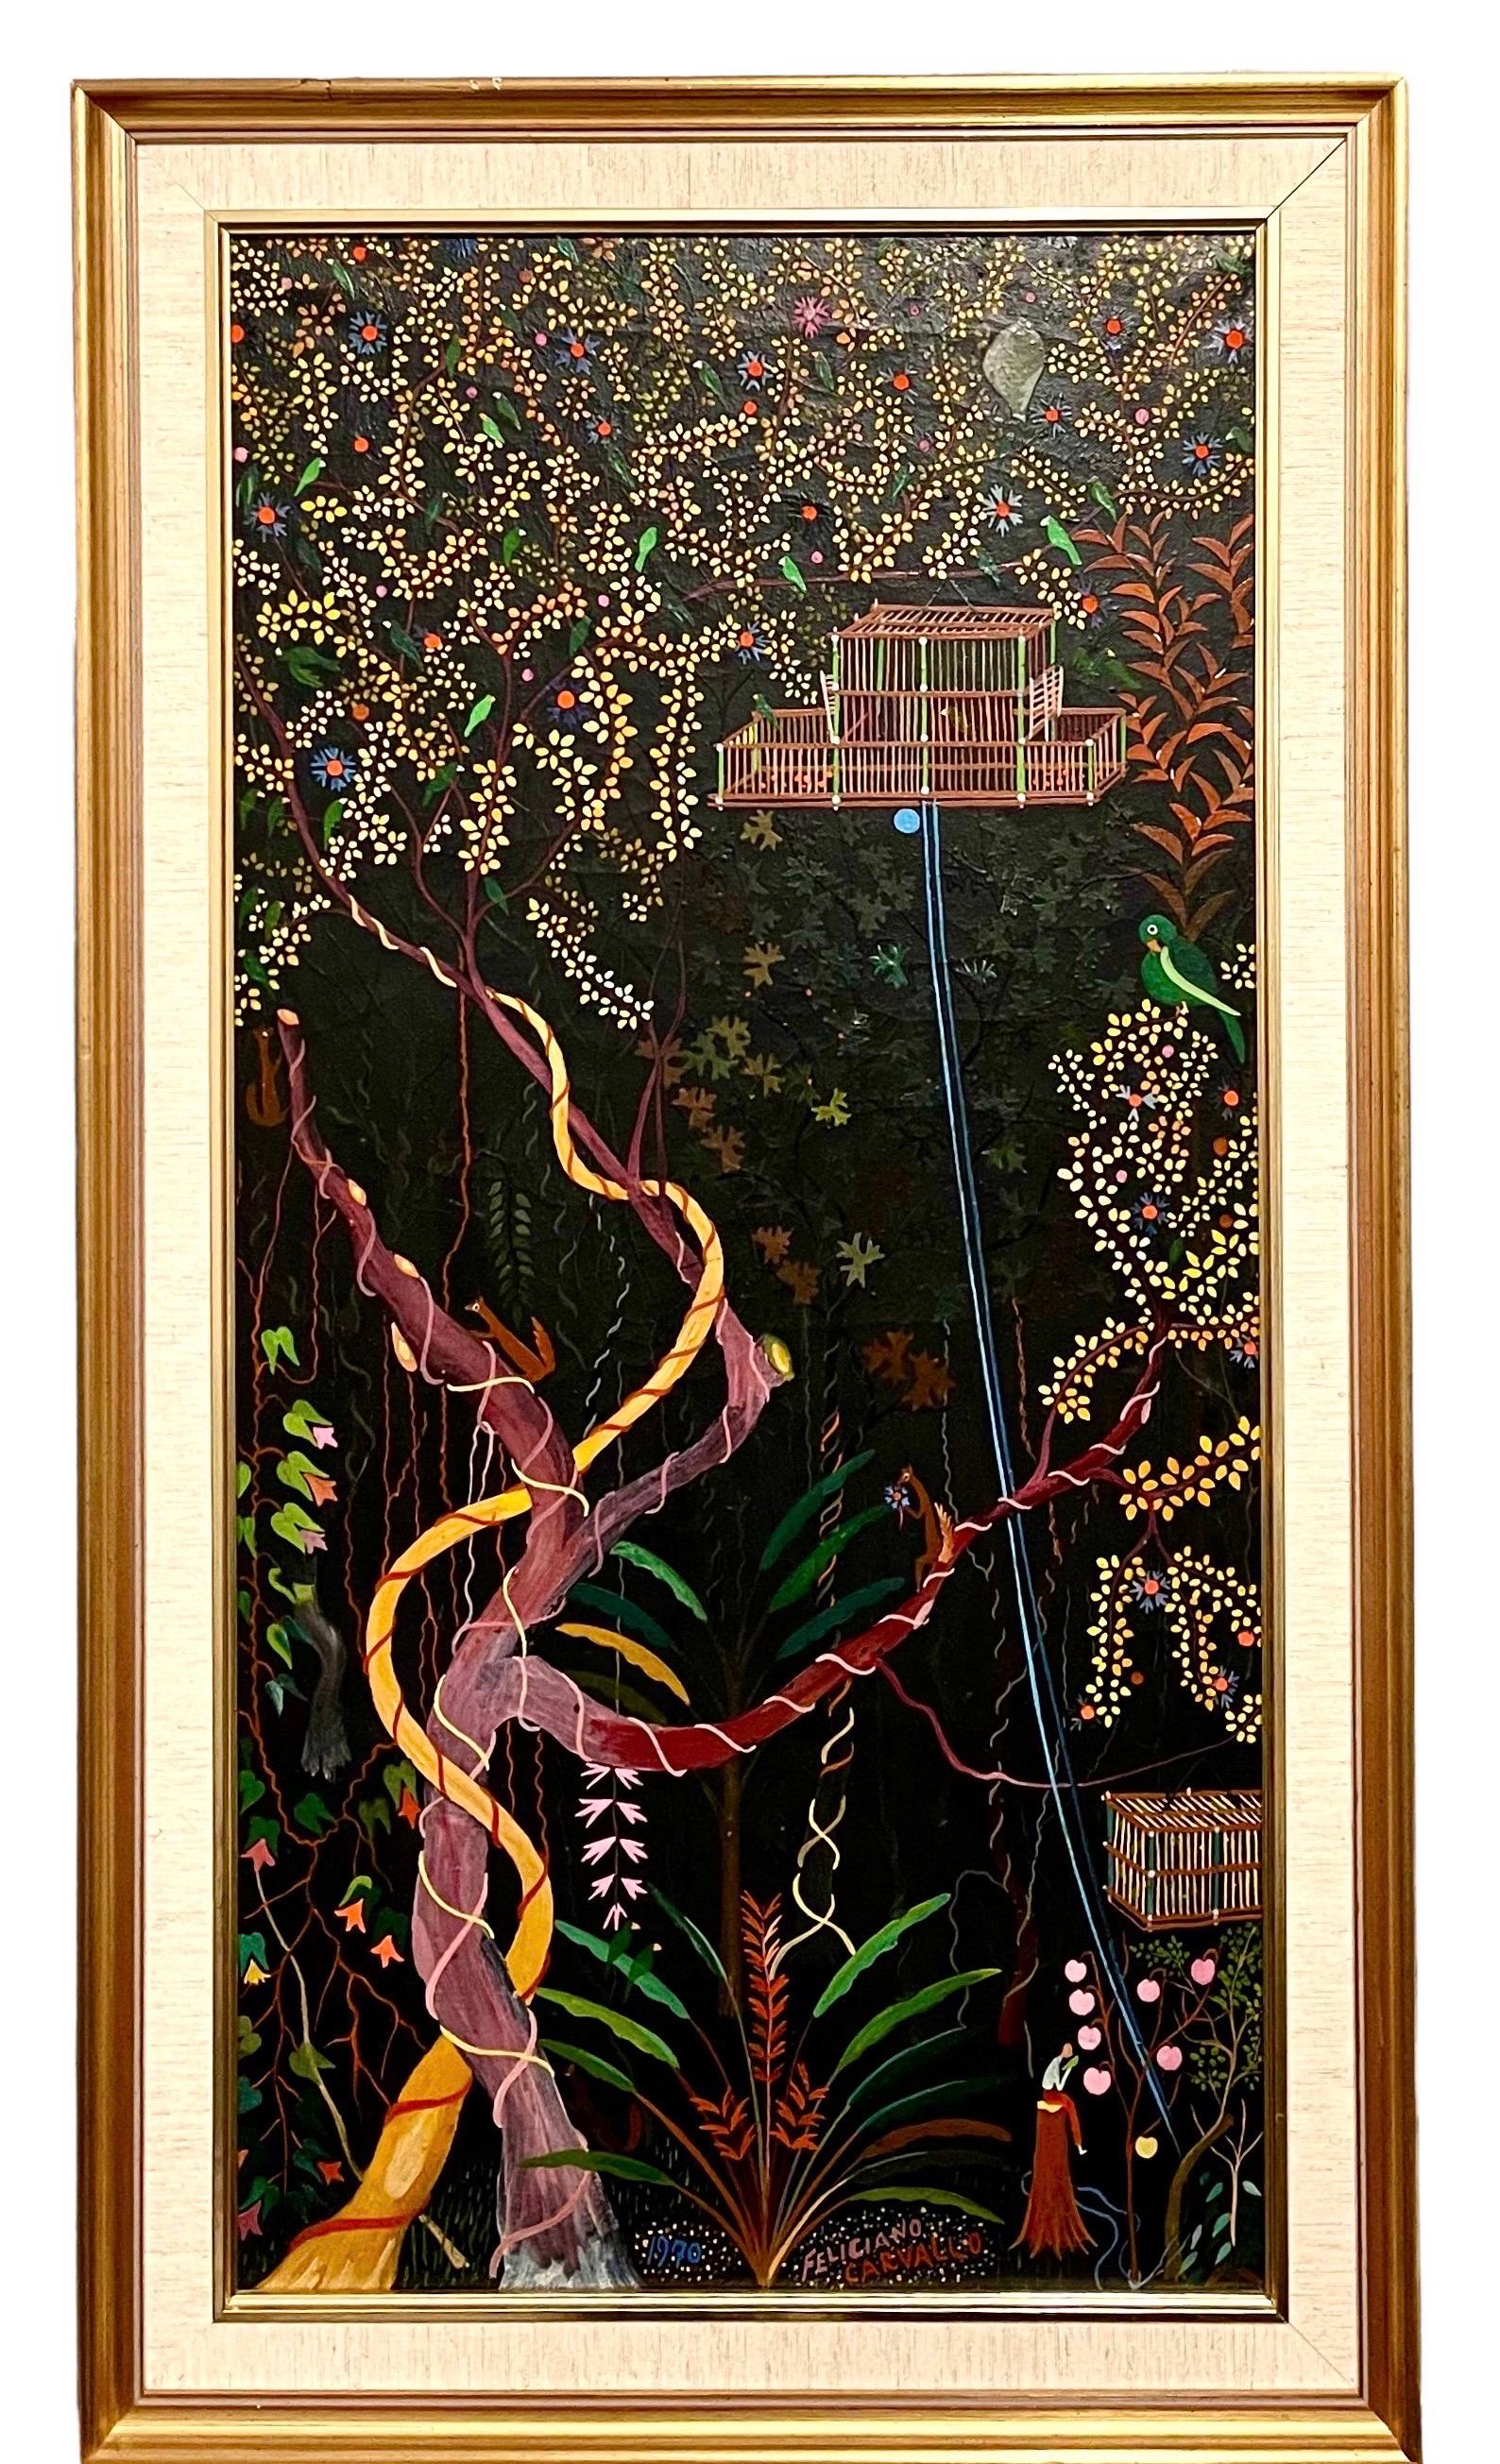 Oil painting of foliage, birds, flowers, tree house.
Framed 34.5 X 19.5 canvas 31 X 16.

Feliciano Carvallo ( Naiguatá, 1920 - Catia La Mar, Vargas, 2012) was a self-taught Venezuelan painter. Carvallo used a naive style to make paintings on themes